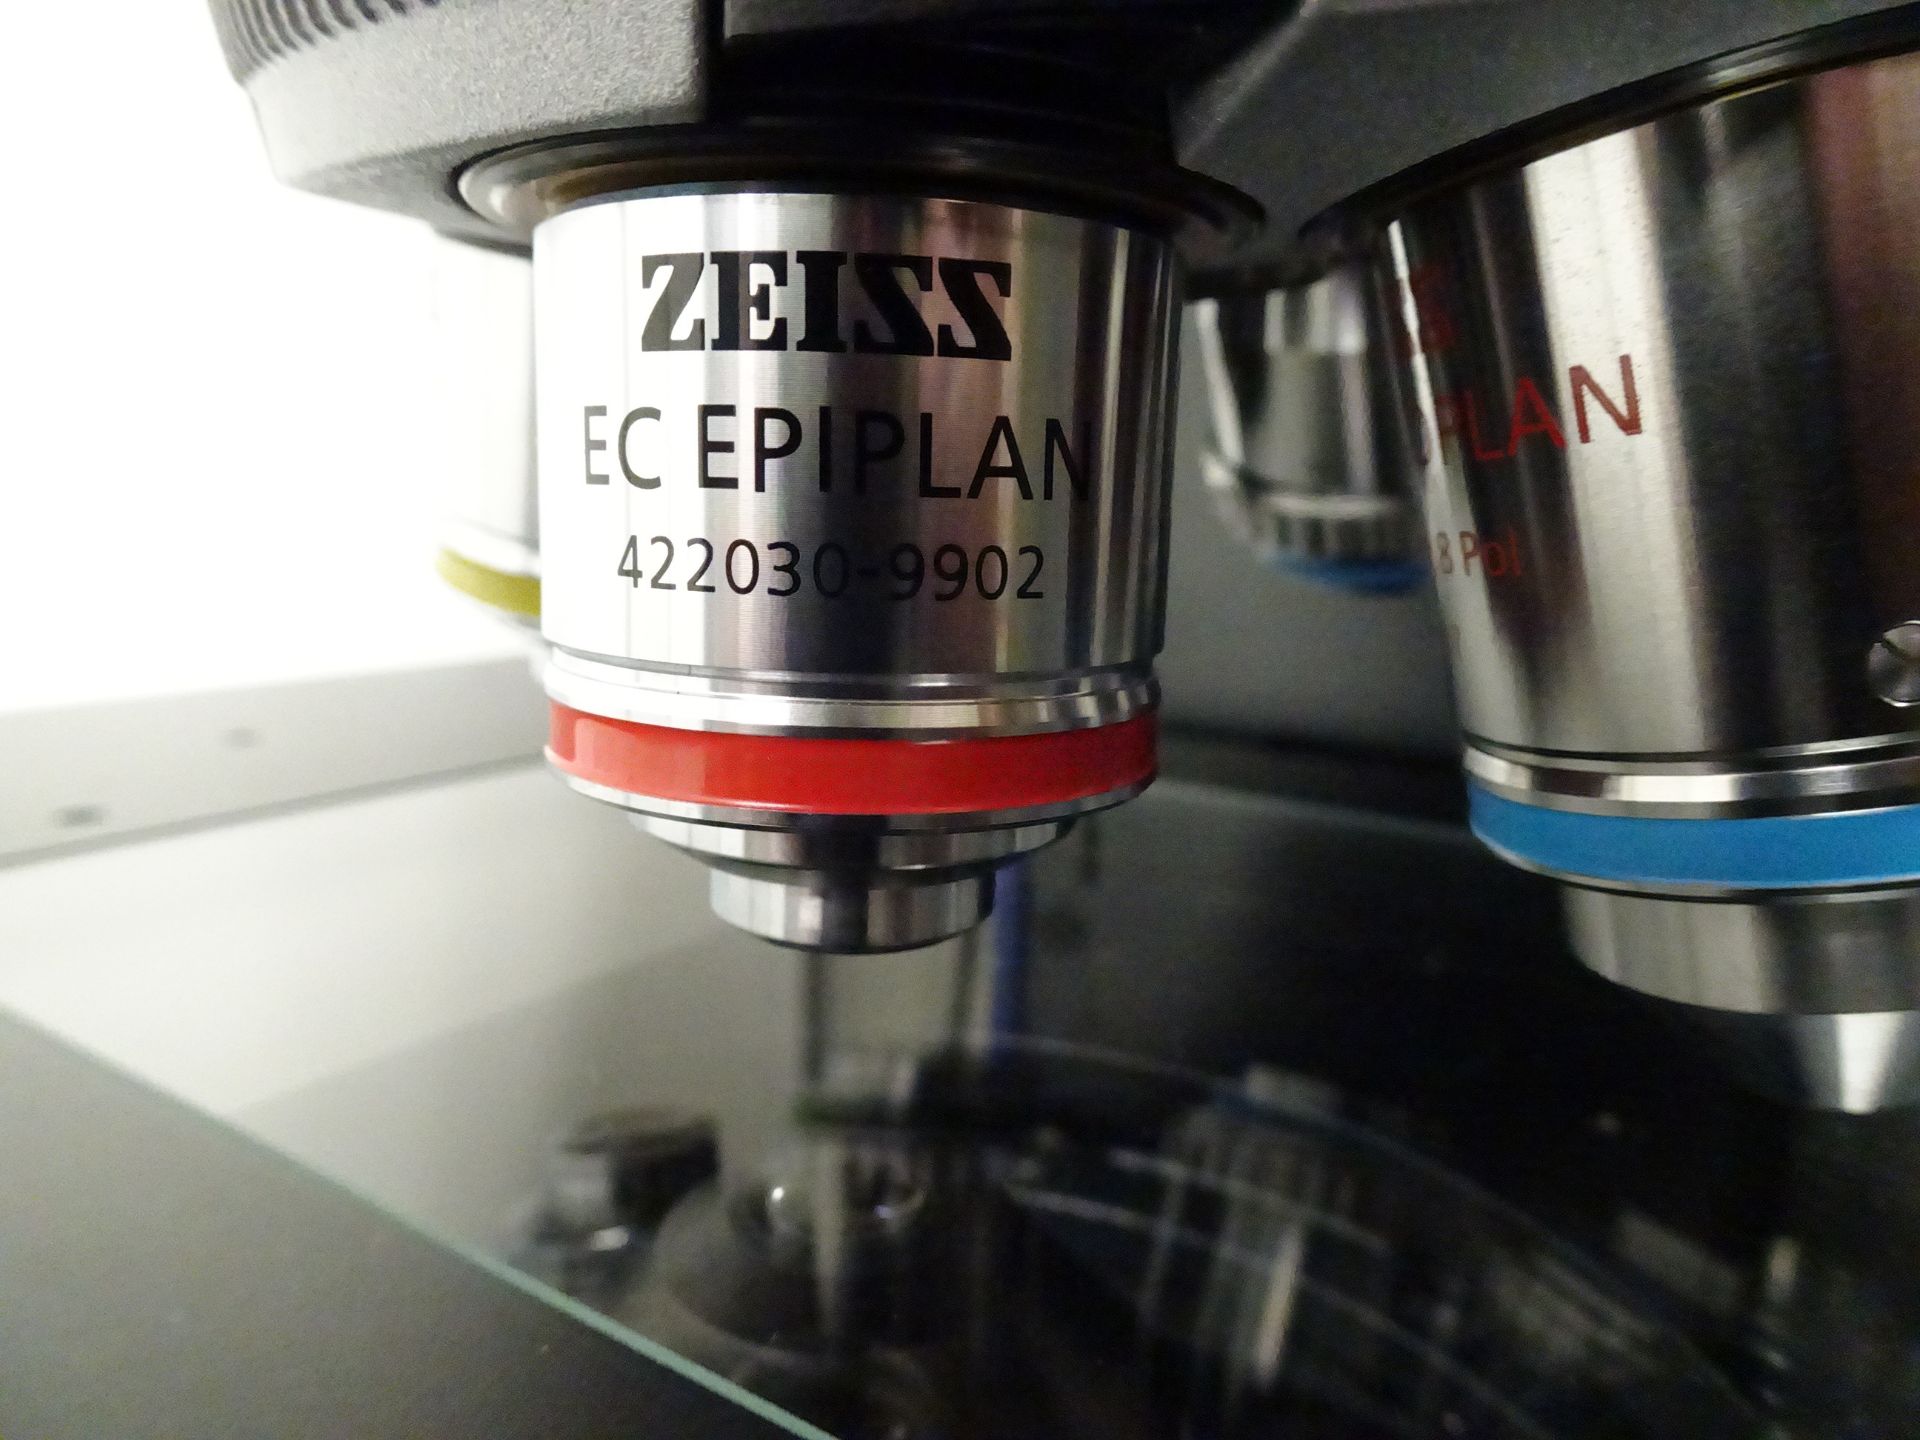 Zeiss Axio Imager.M2 Microscope With AxioCam MRM Camers With 60N-C 1" Camera Adapter, (2) 1PL 10x/23 - Image 14 of 22